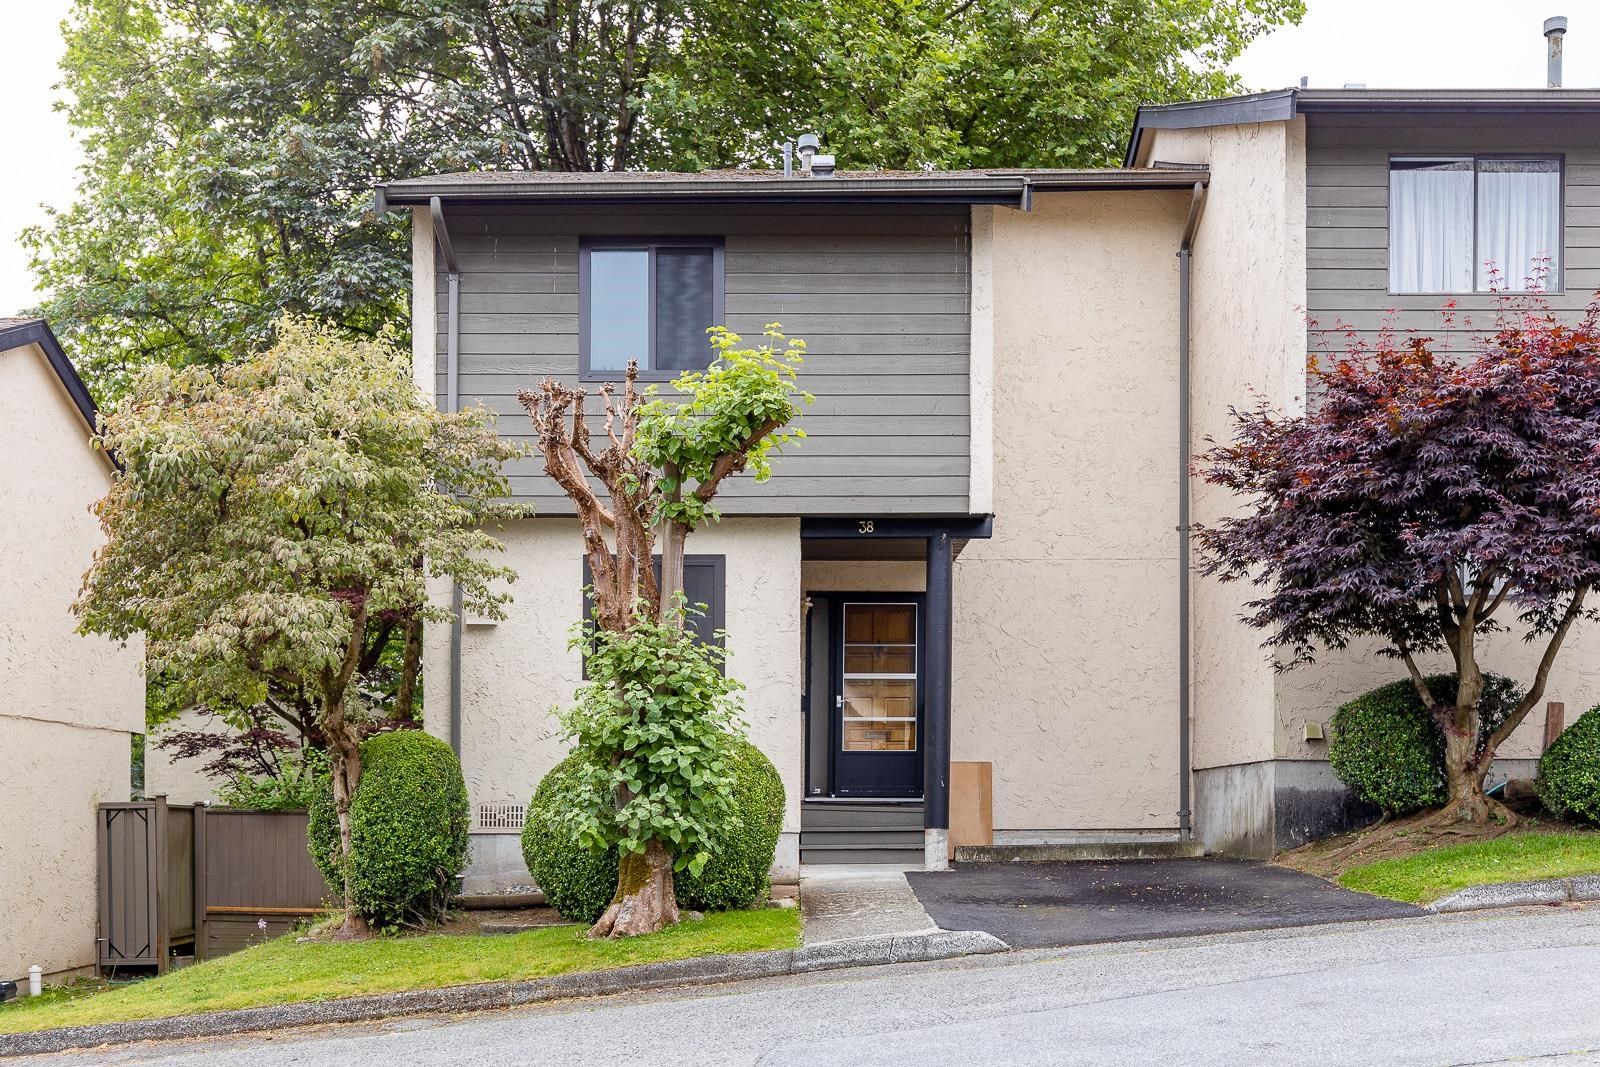 This property has sold: 38 2905 NORMAN AVE in Coquitlam